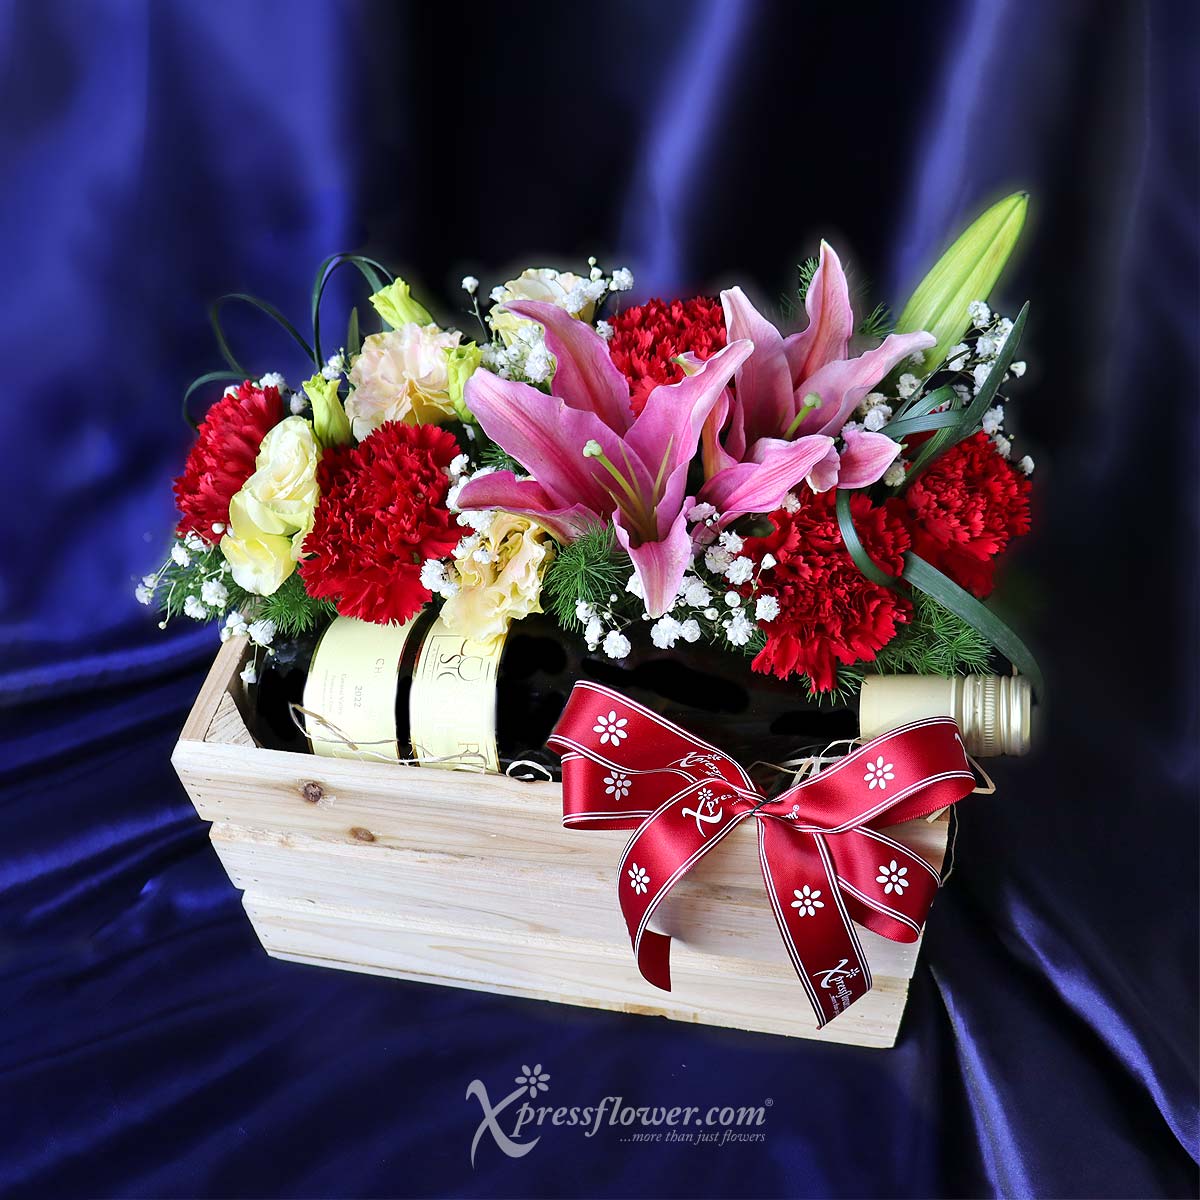 AR2304 Crimson Crate (Cabernet Sauvignon with Red Carnations & Pink Lilies) 1c